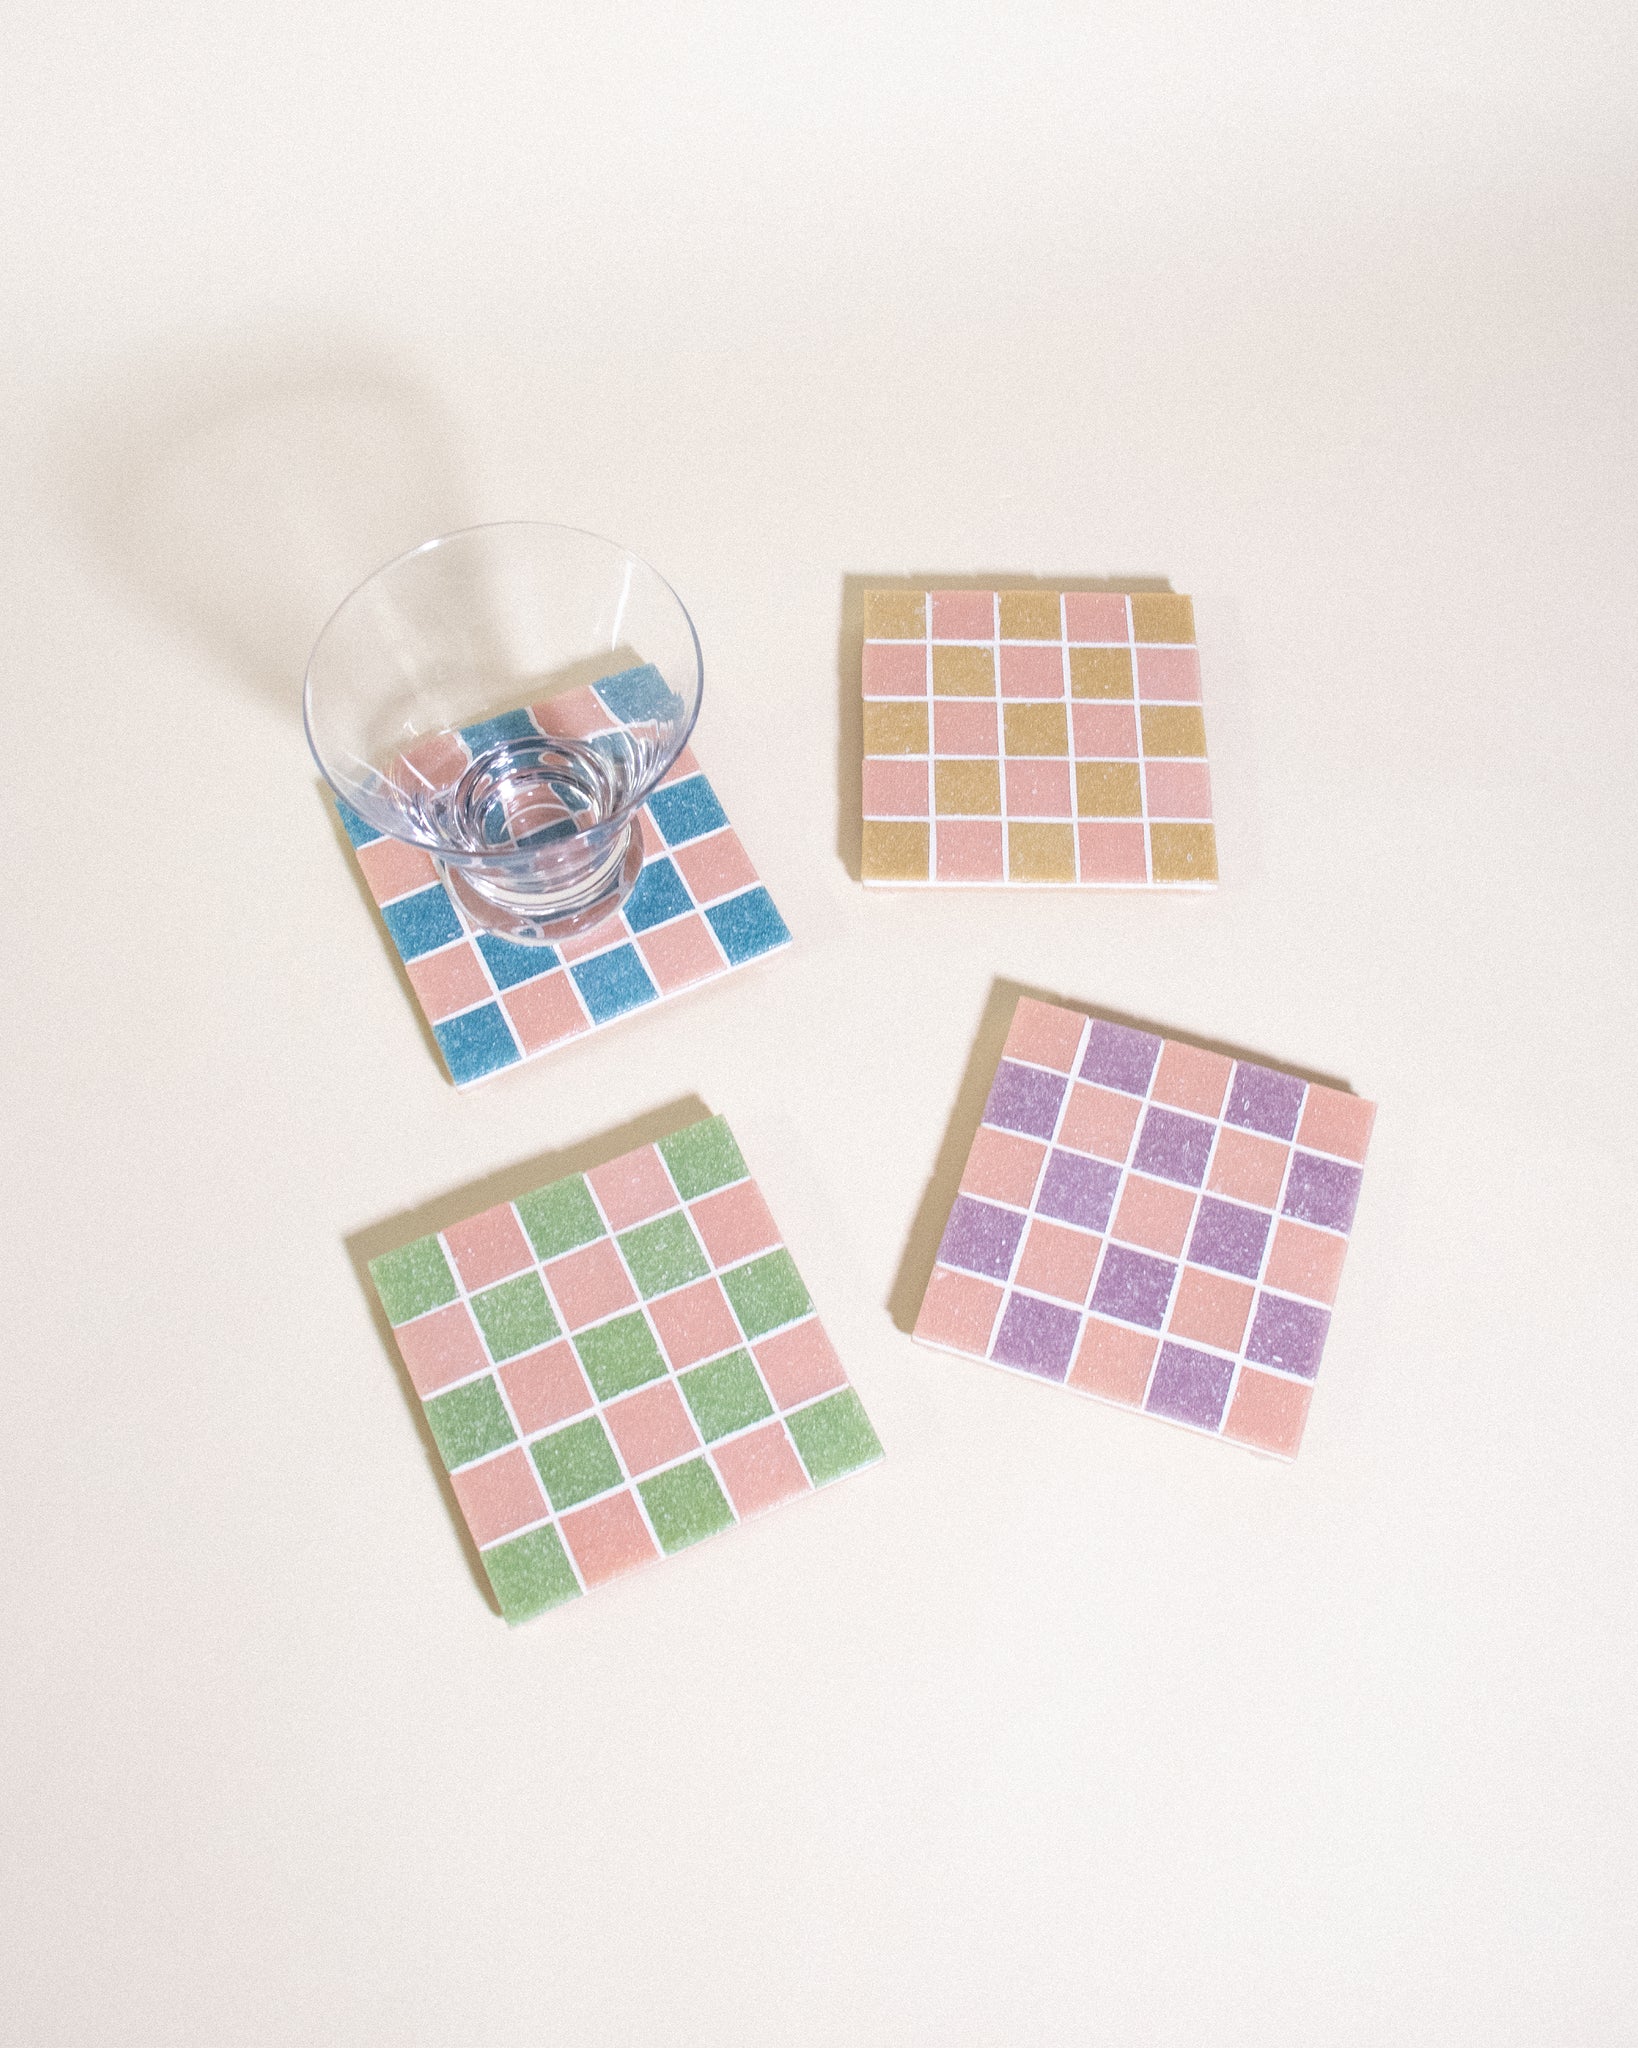 GLASS TILE COASTER - Sour Patch Candy - 06